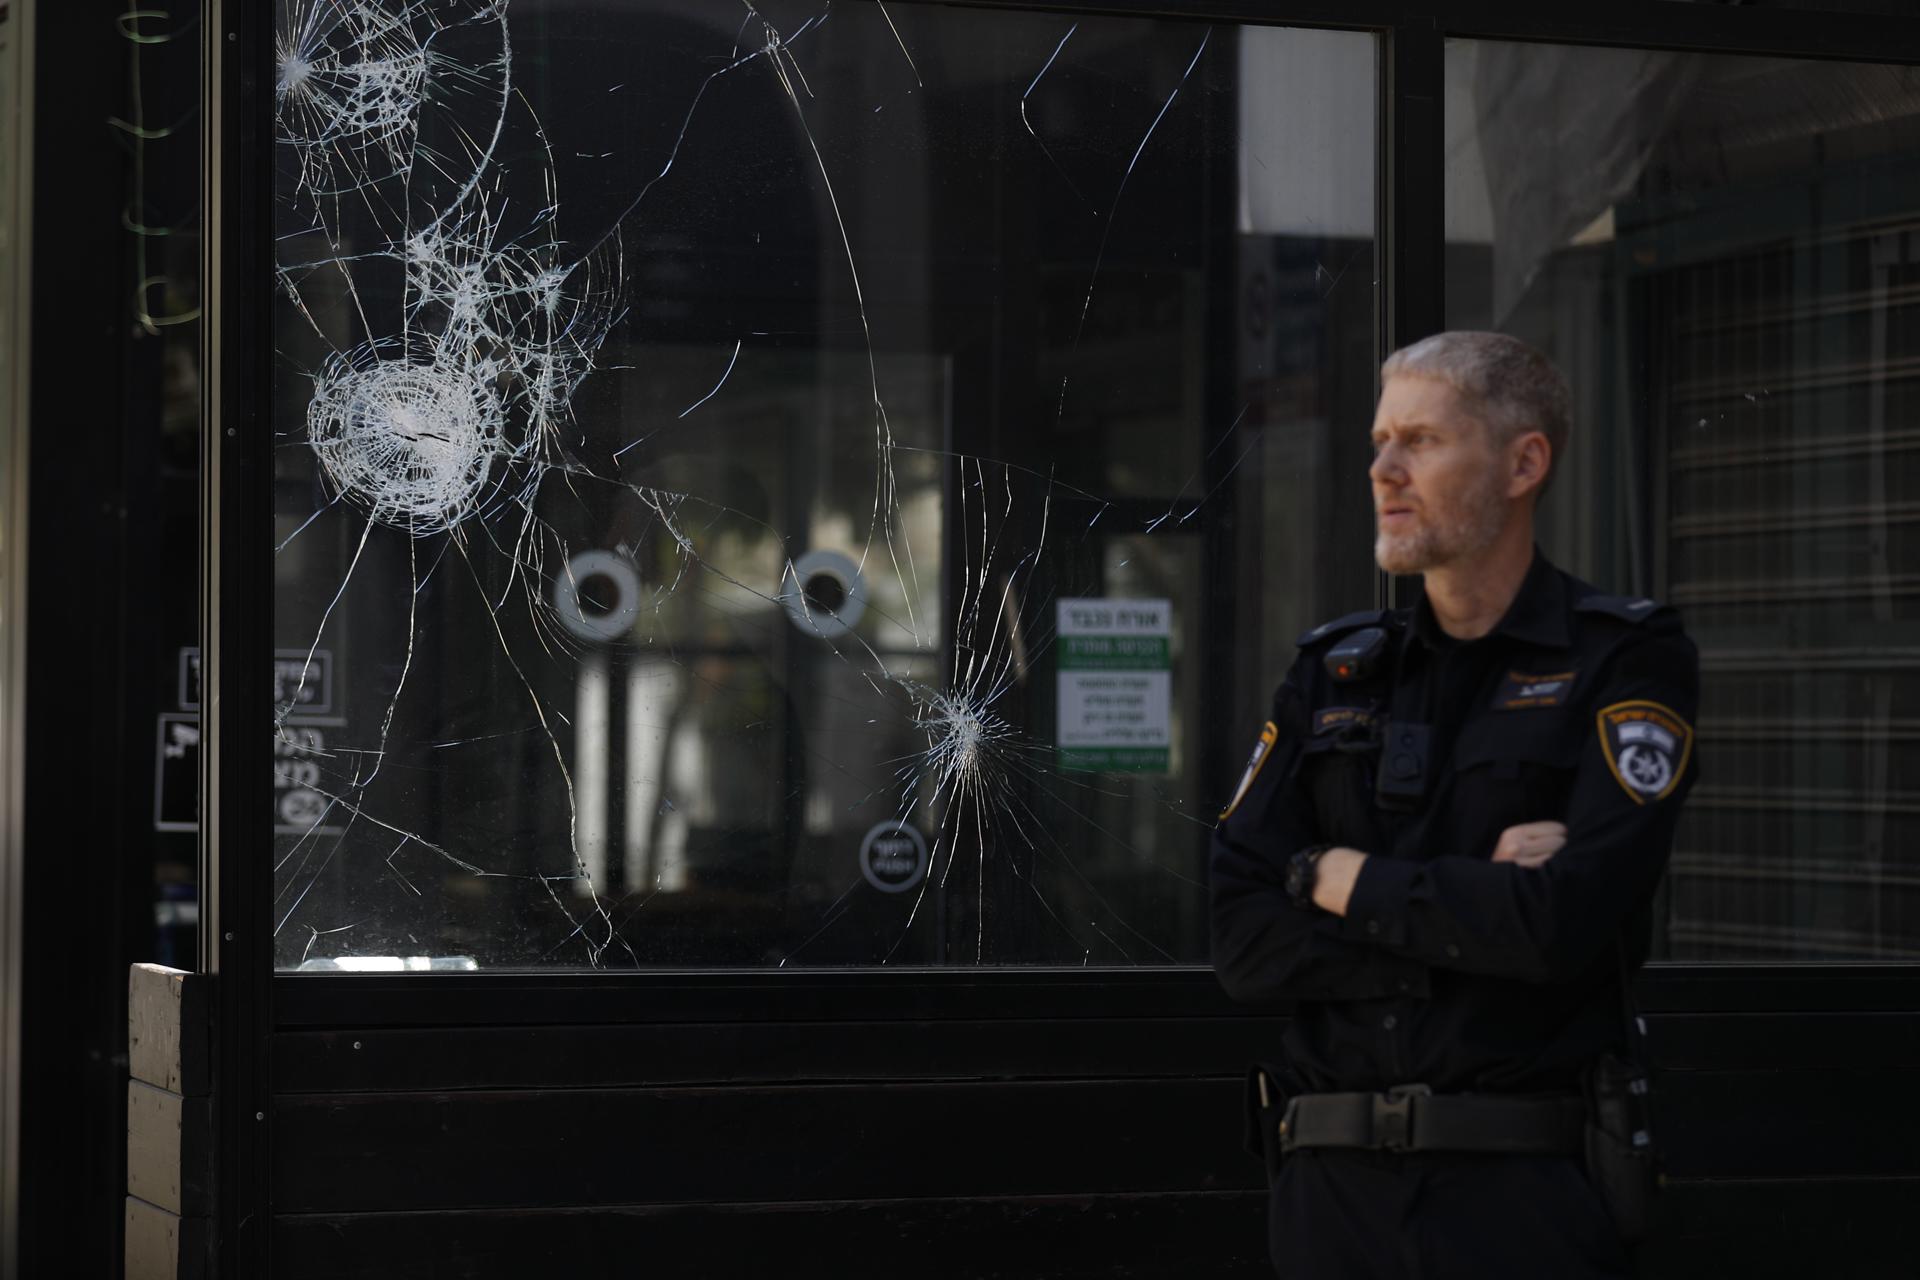 An Israeli police officer looks on as he stands next to a damaged window after clashes between opponents of the Eritrean regime and the Israeli police in Tel Aviv, Israel, 02 September 2023. EFE-EPA/ATEF SAFADI
